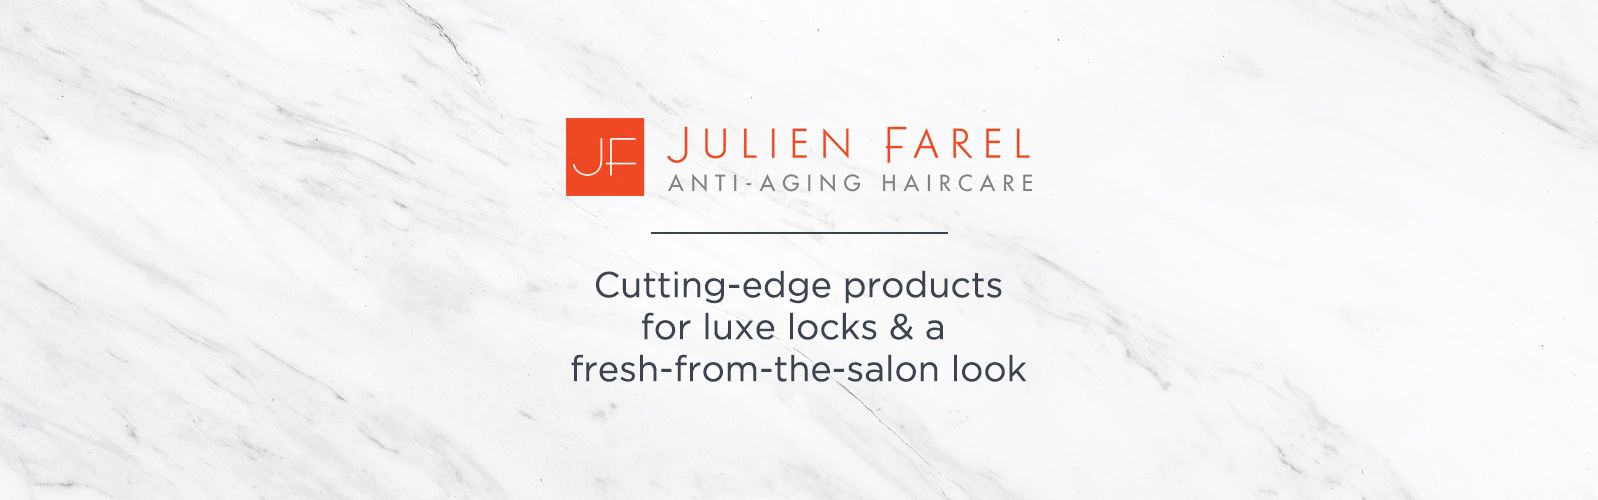 Julien Farel. Cutting-edge products for luxe locks & a fresh-from-the-salon look